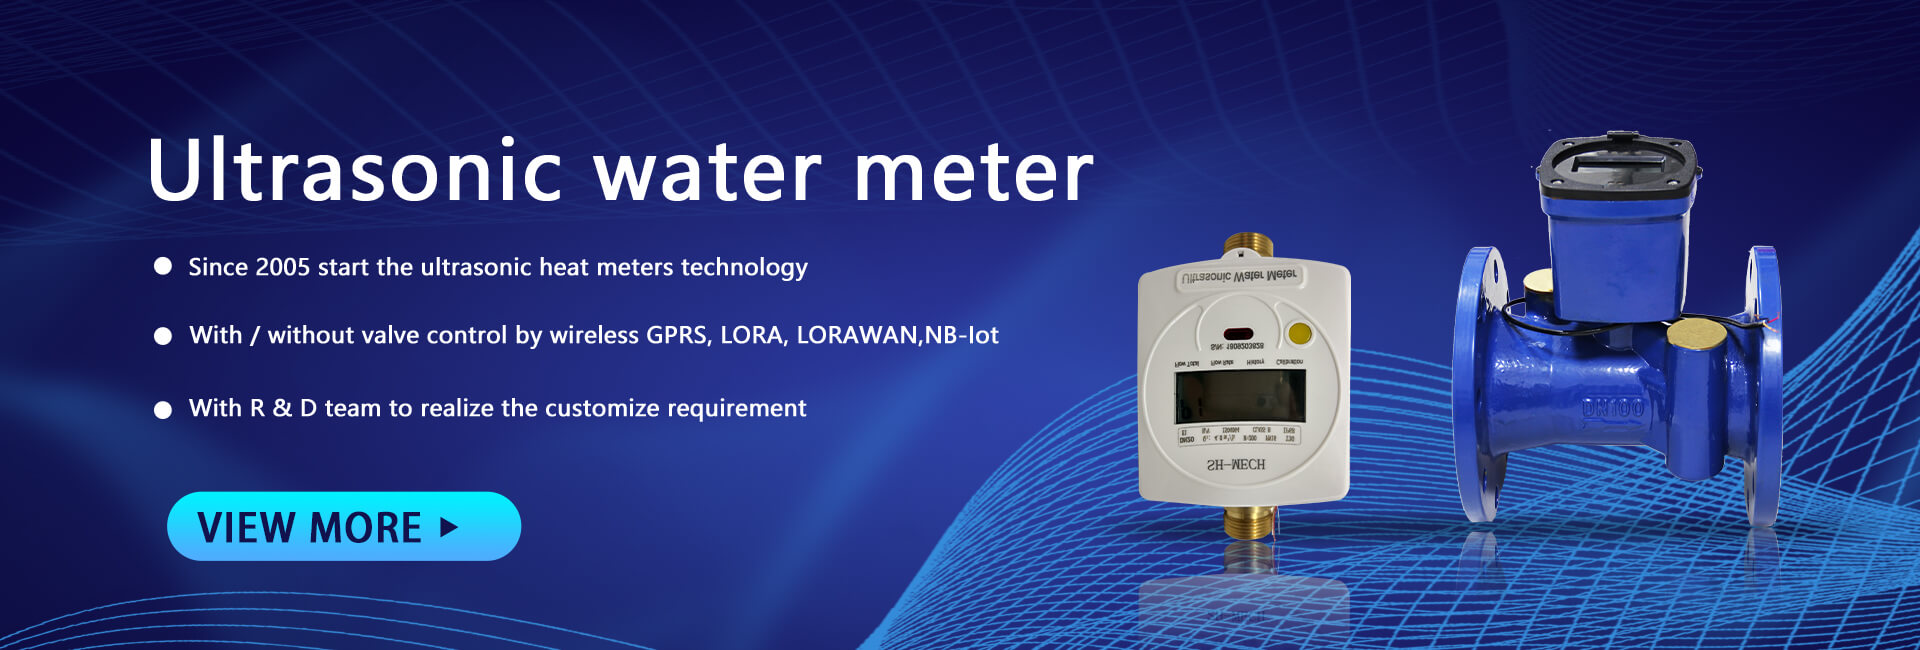 What are the price determinants of ultrasonic water meters?